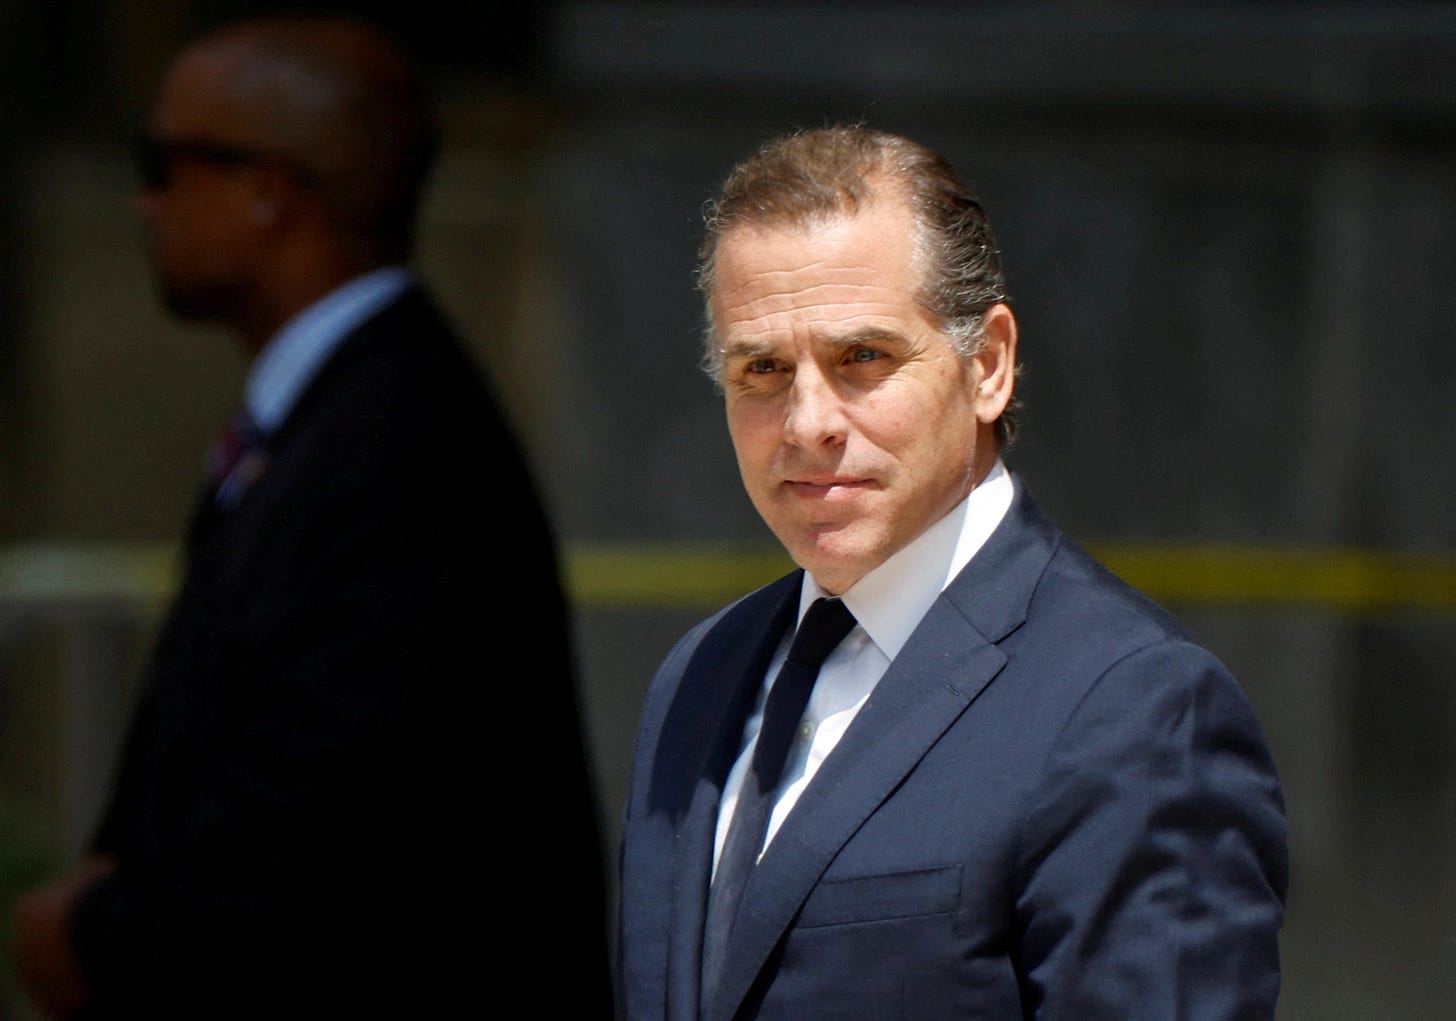 Hunter Biden could face trial, newly named US special counsel says | Reuters